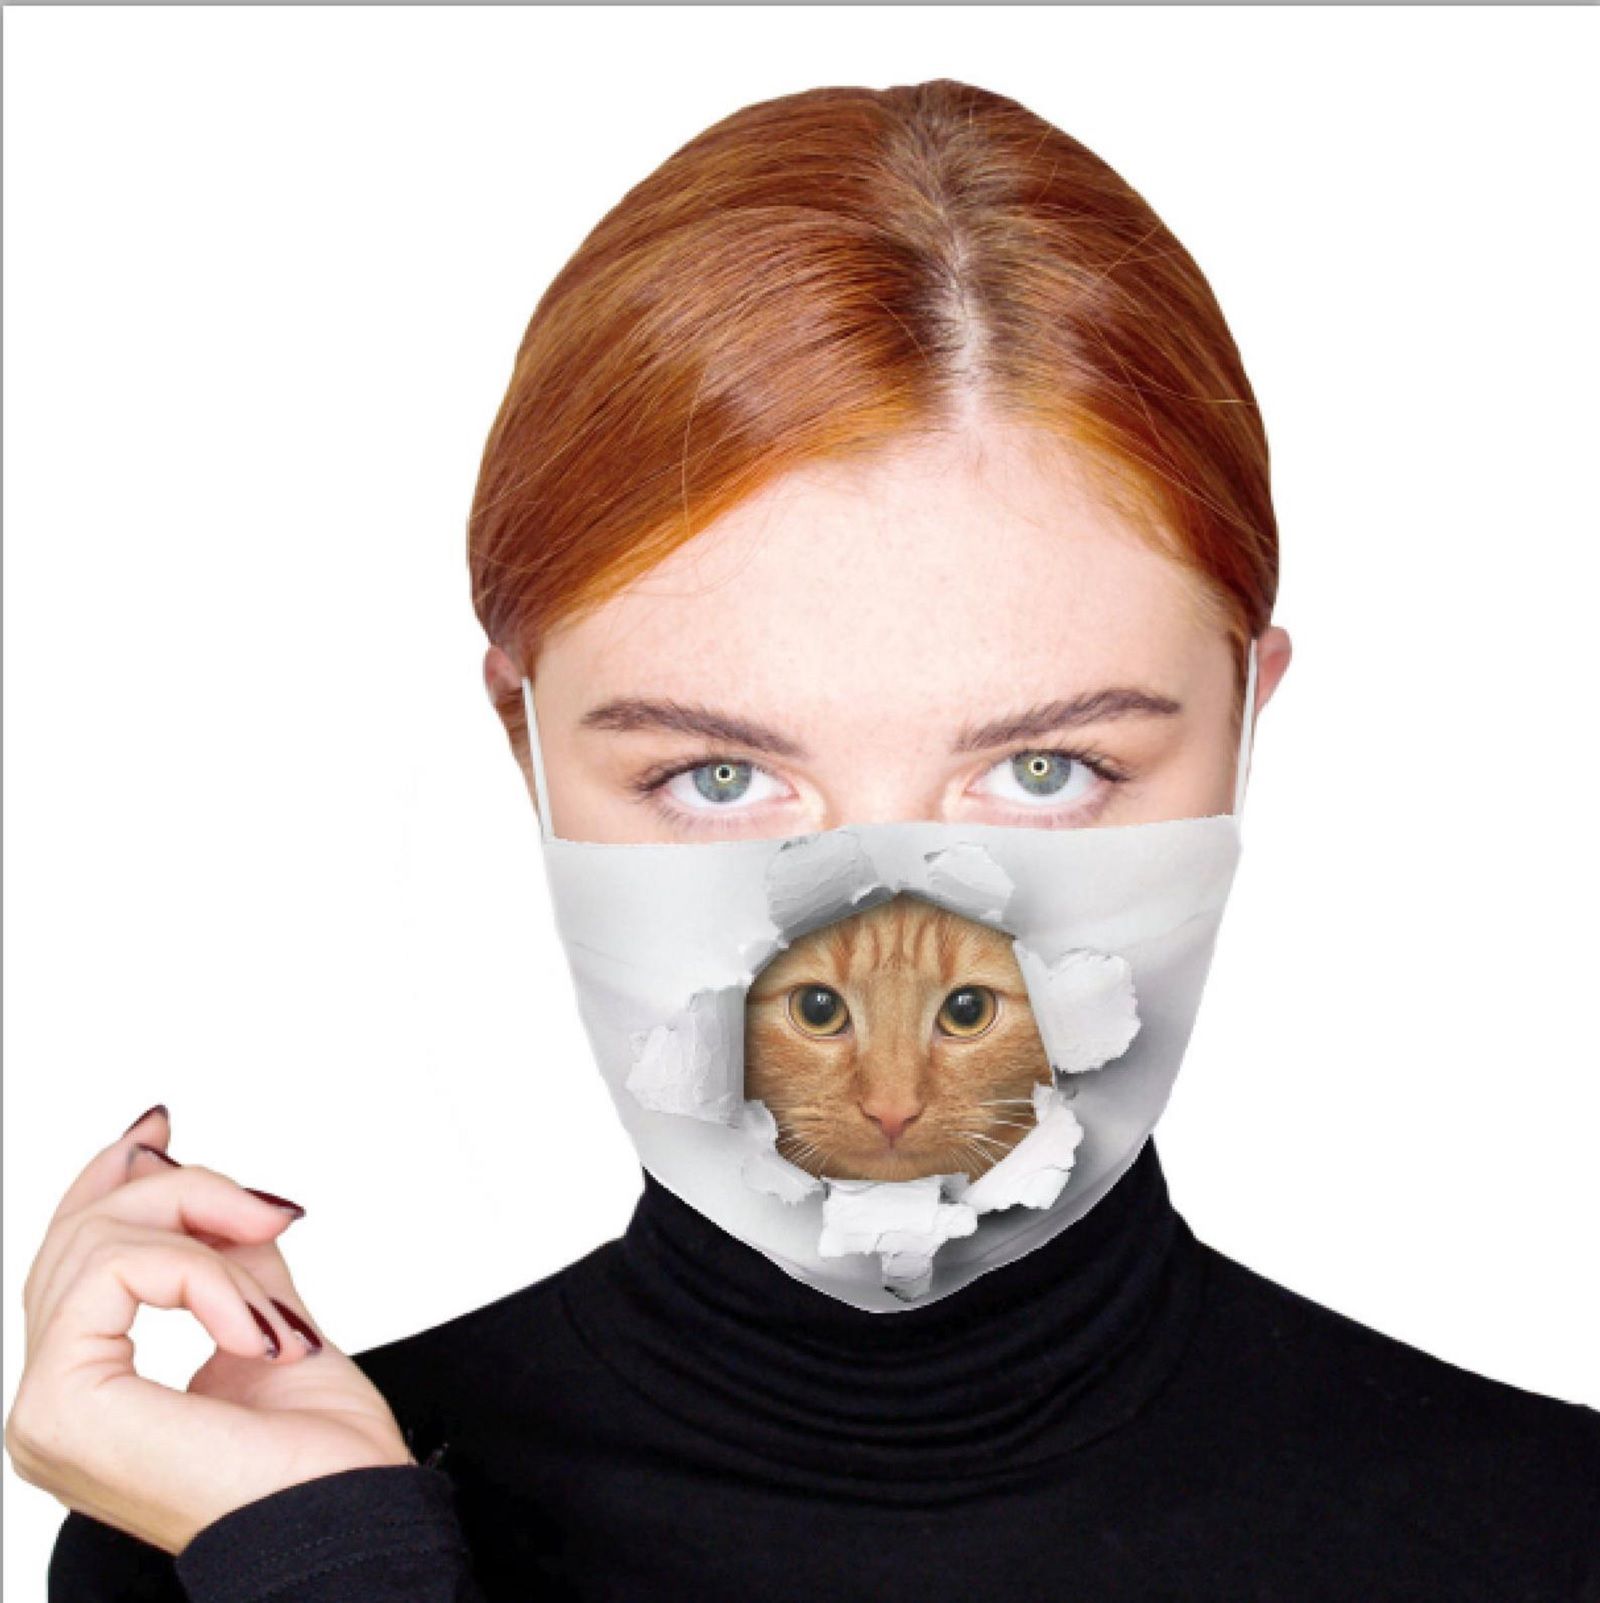 Amusing face masks that'll brighten up your trip to the shops photo 12